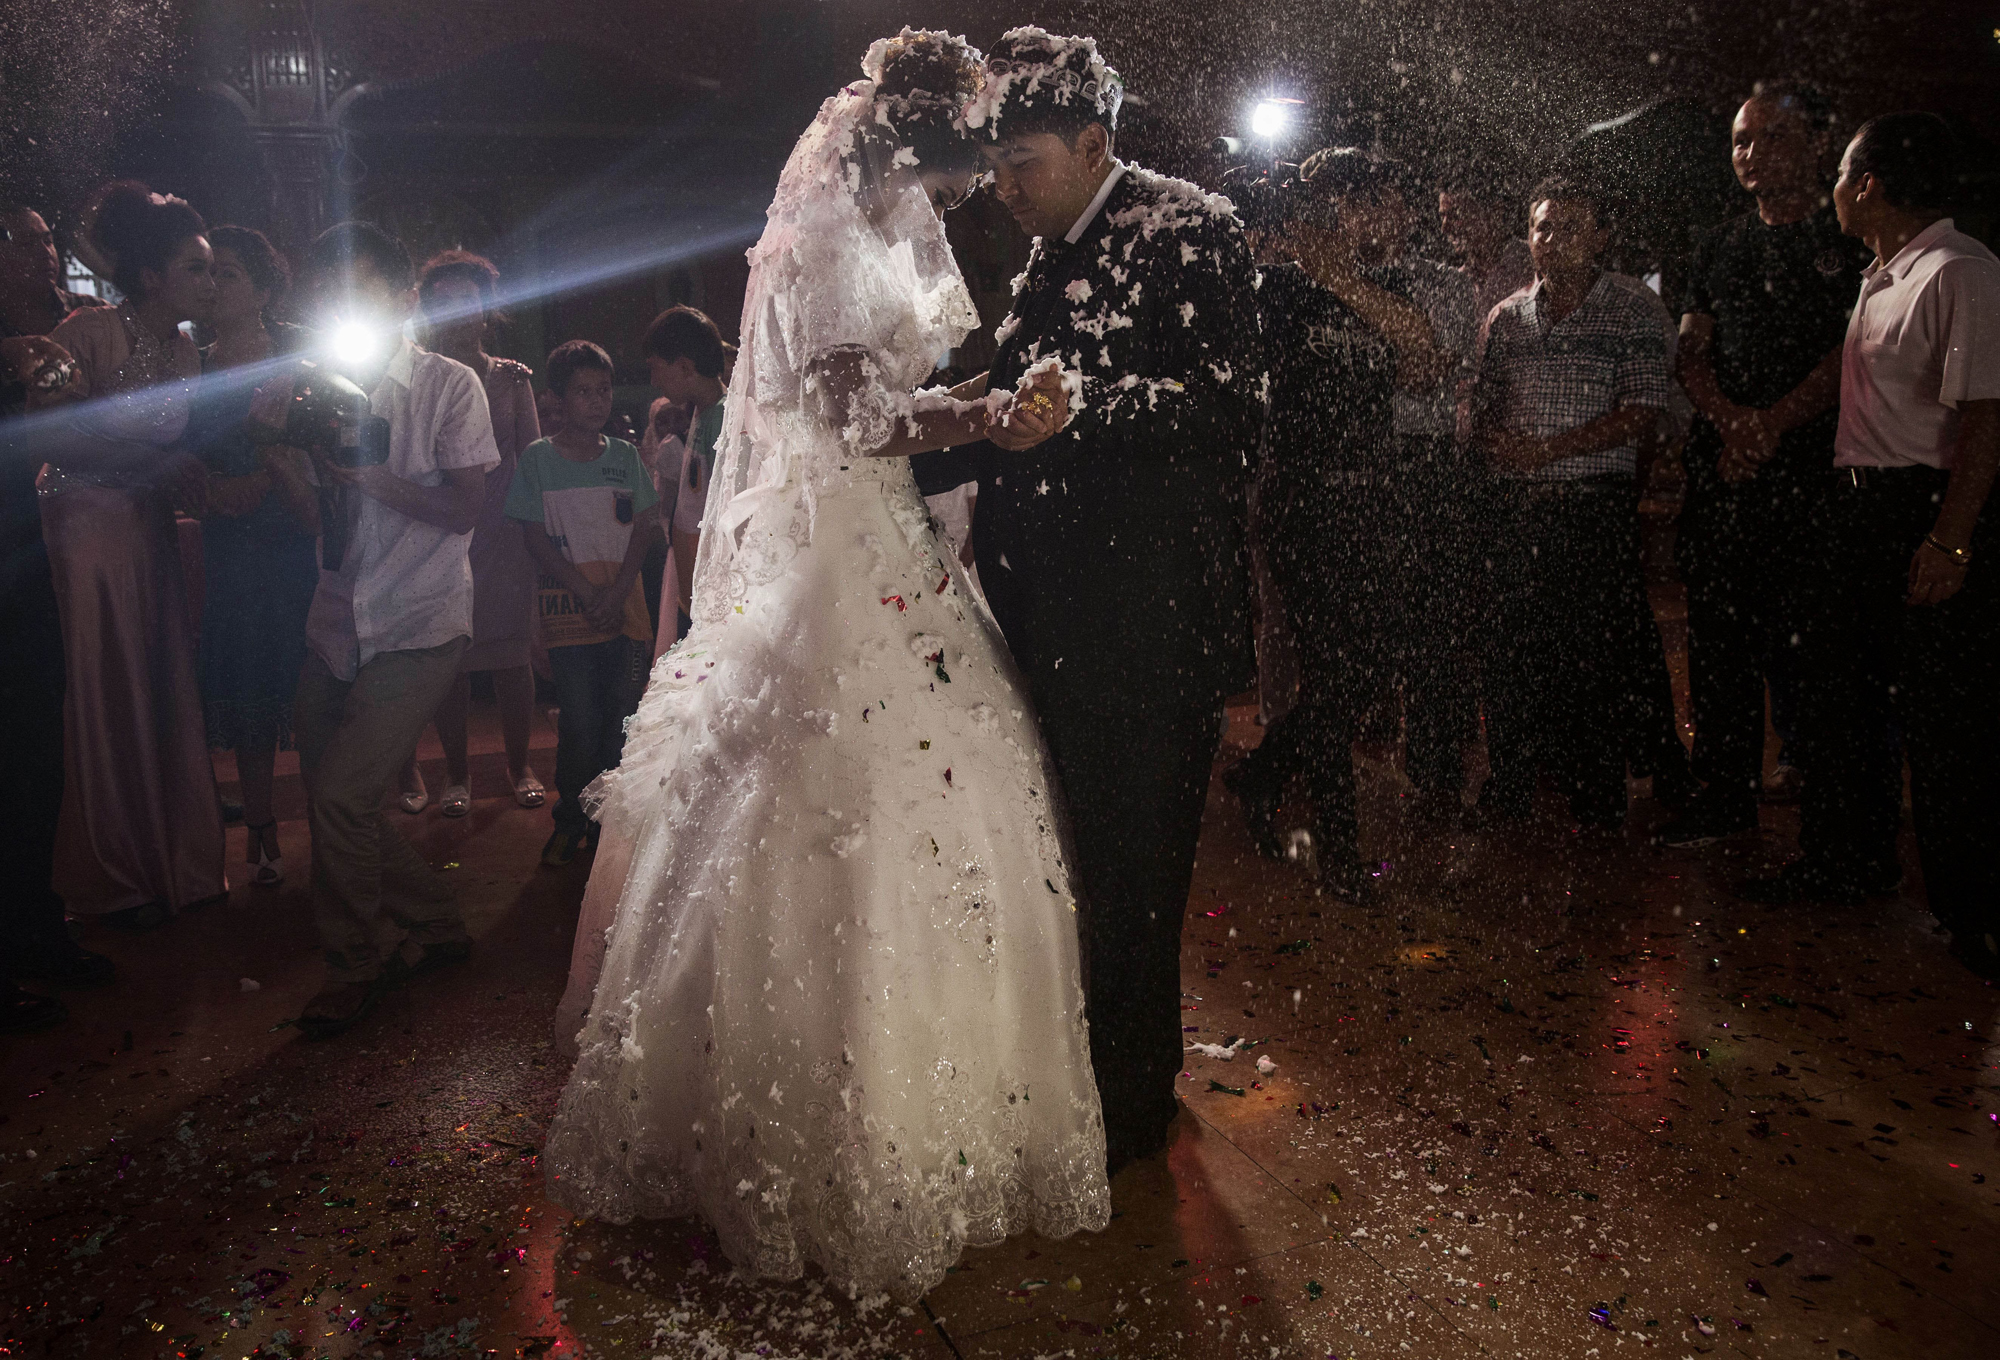 A Uyghur couple have their first dance at their wedding celebration after being married on August 2, 2014 in Kashgar.